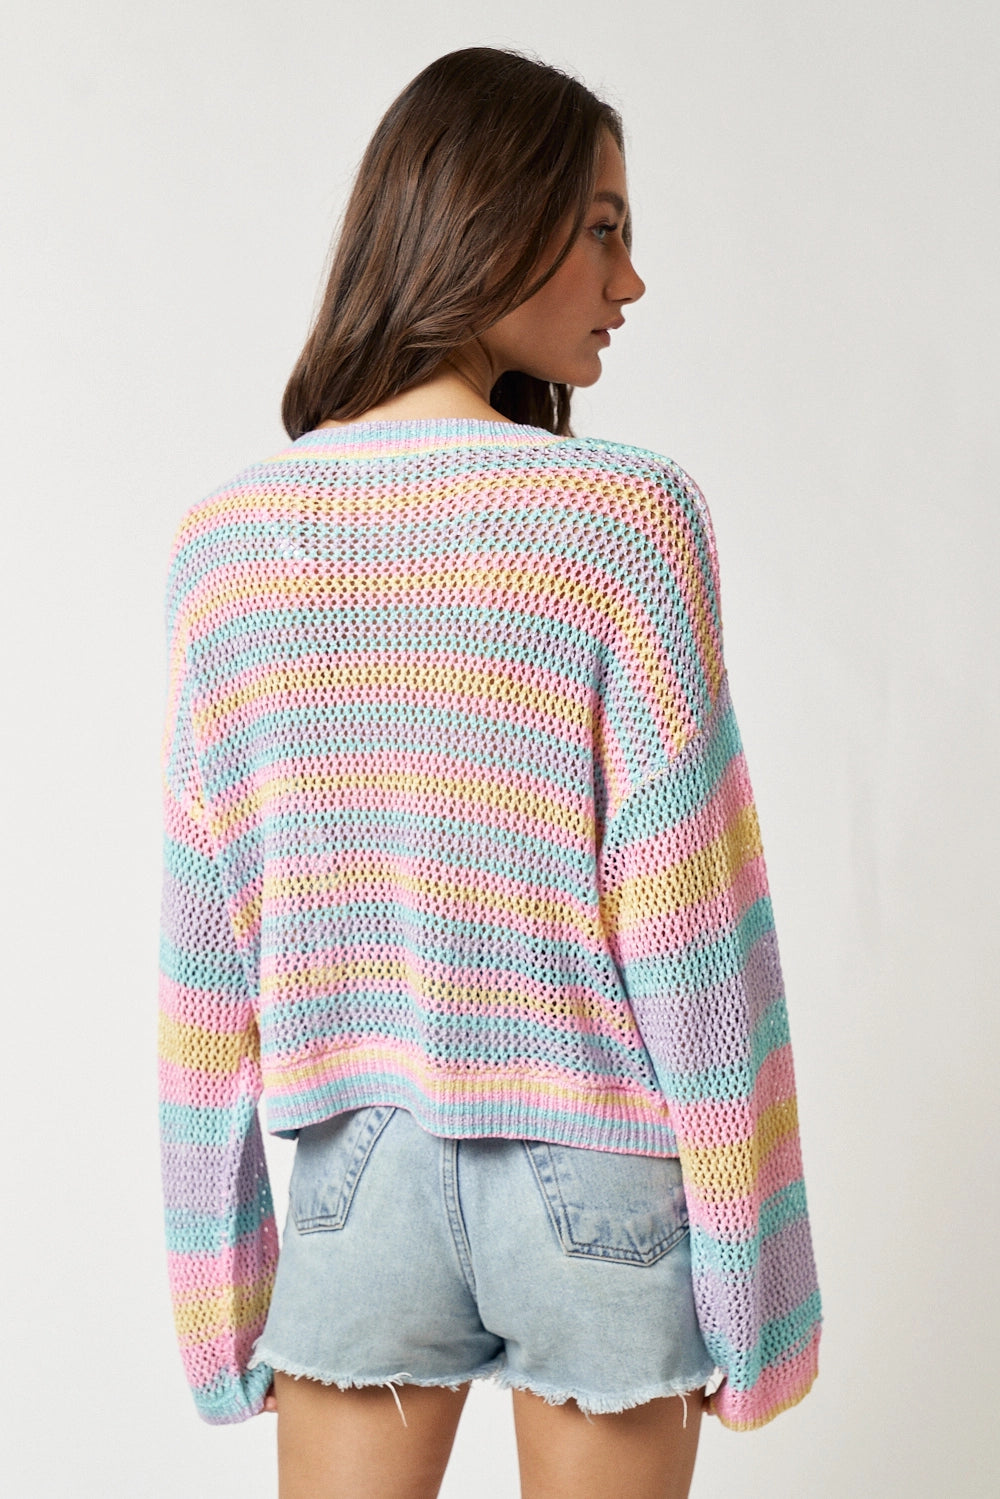 Rainbow Cover Up Sweater Top